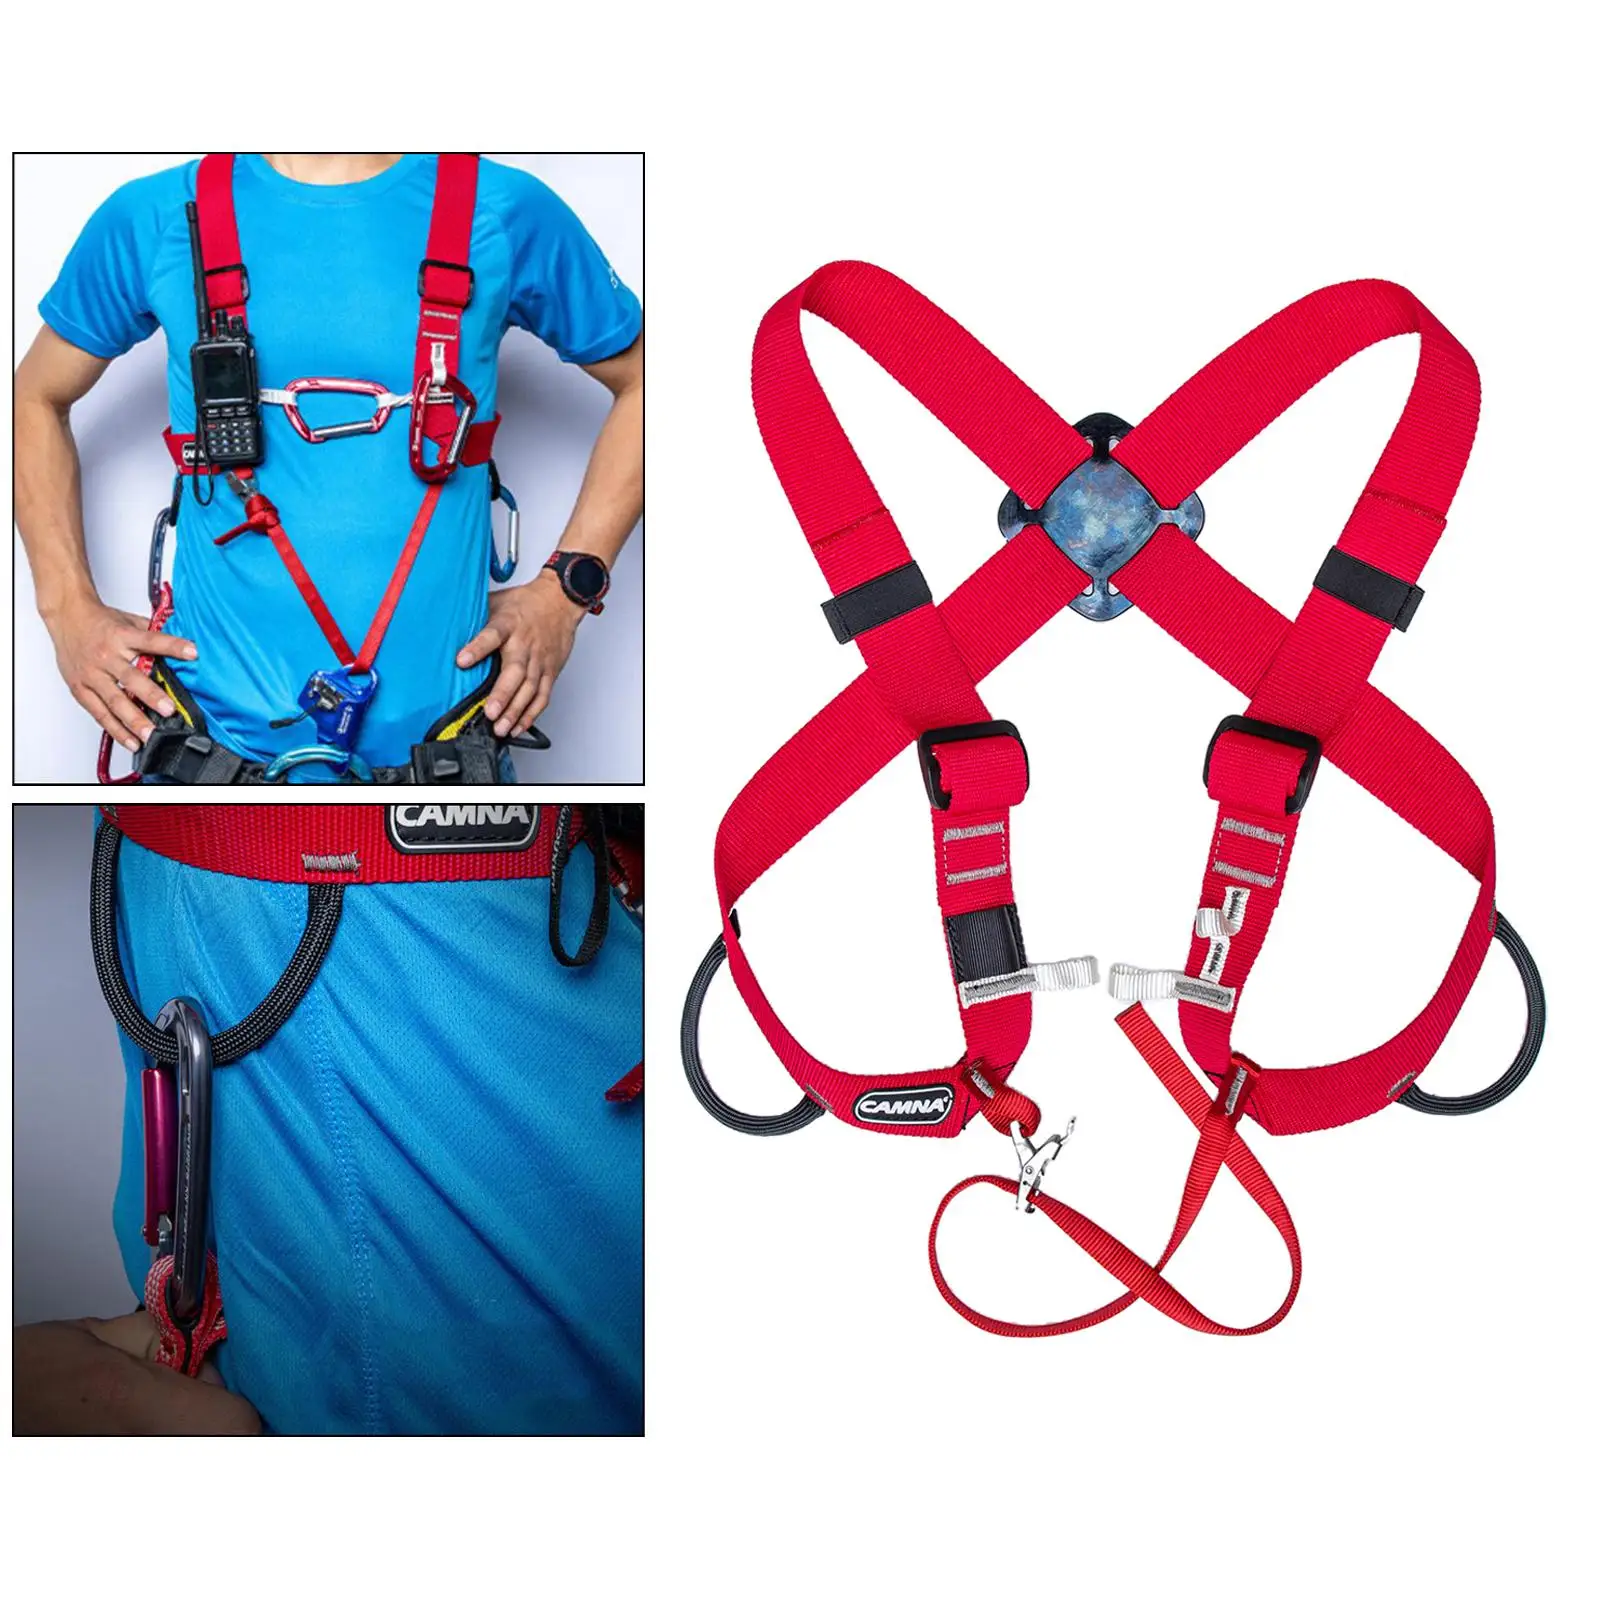 Upper Body Safety Harness Ascending Protection Adjustable Fixed Belt Caving Canyoning Rock Climb